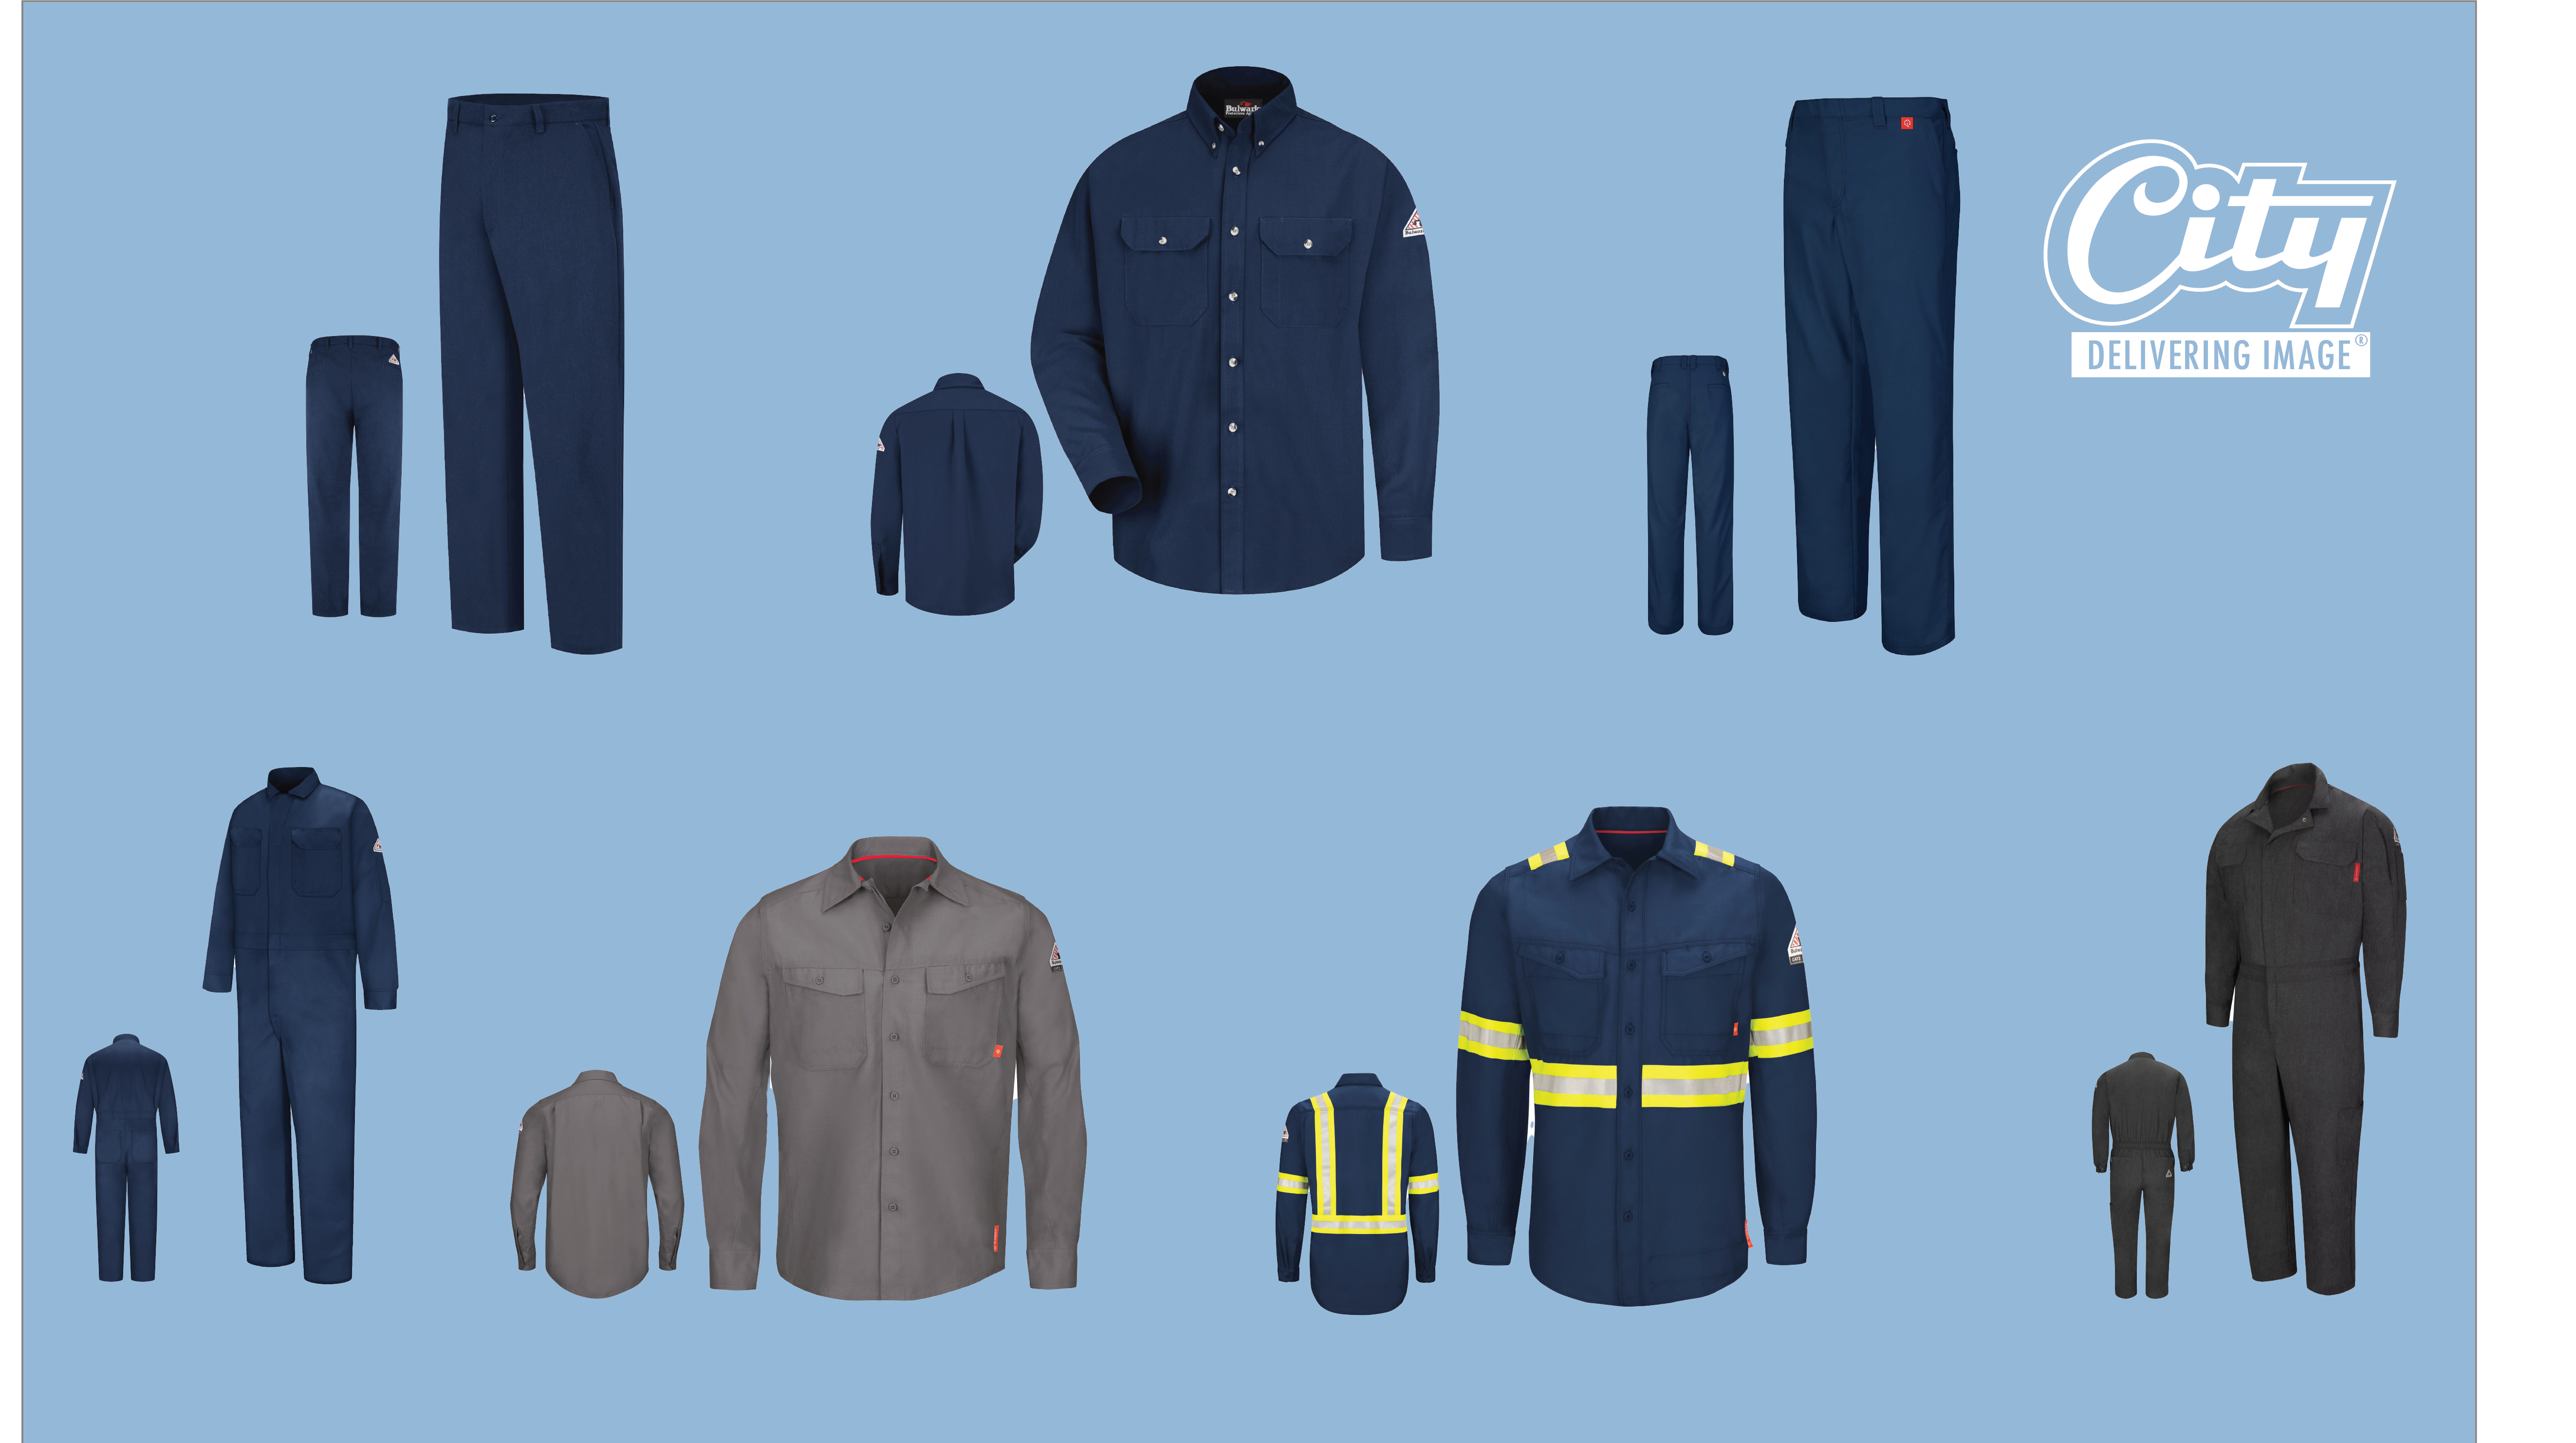 flame resistant clothing, fr uniforms, fr shirts, safety uniforms